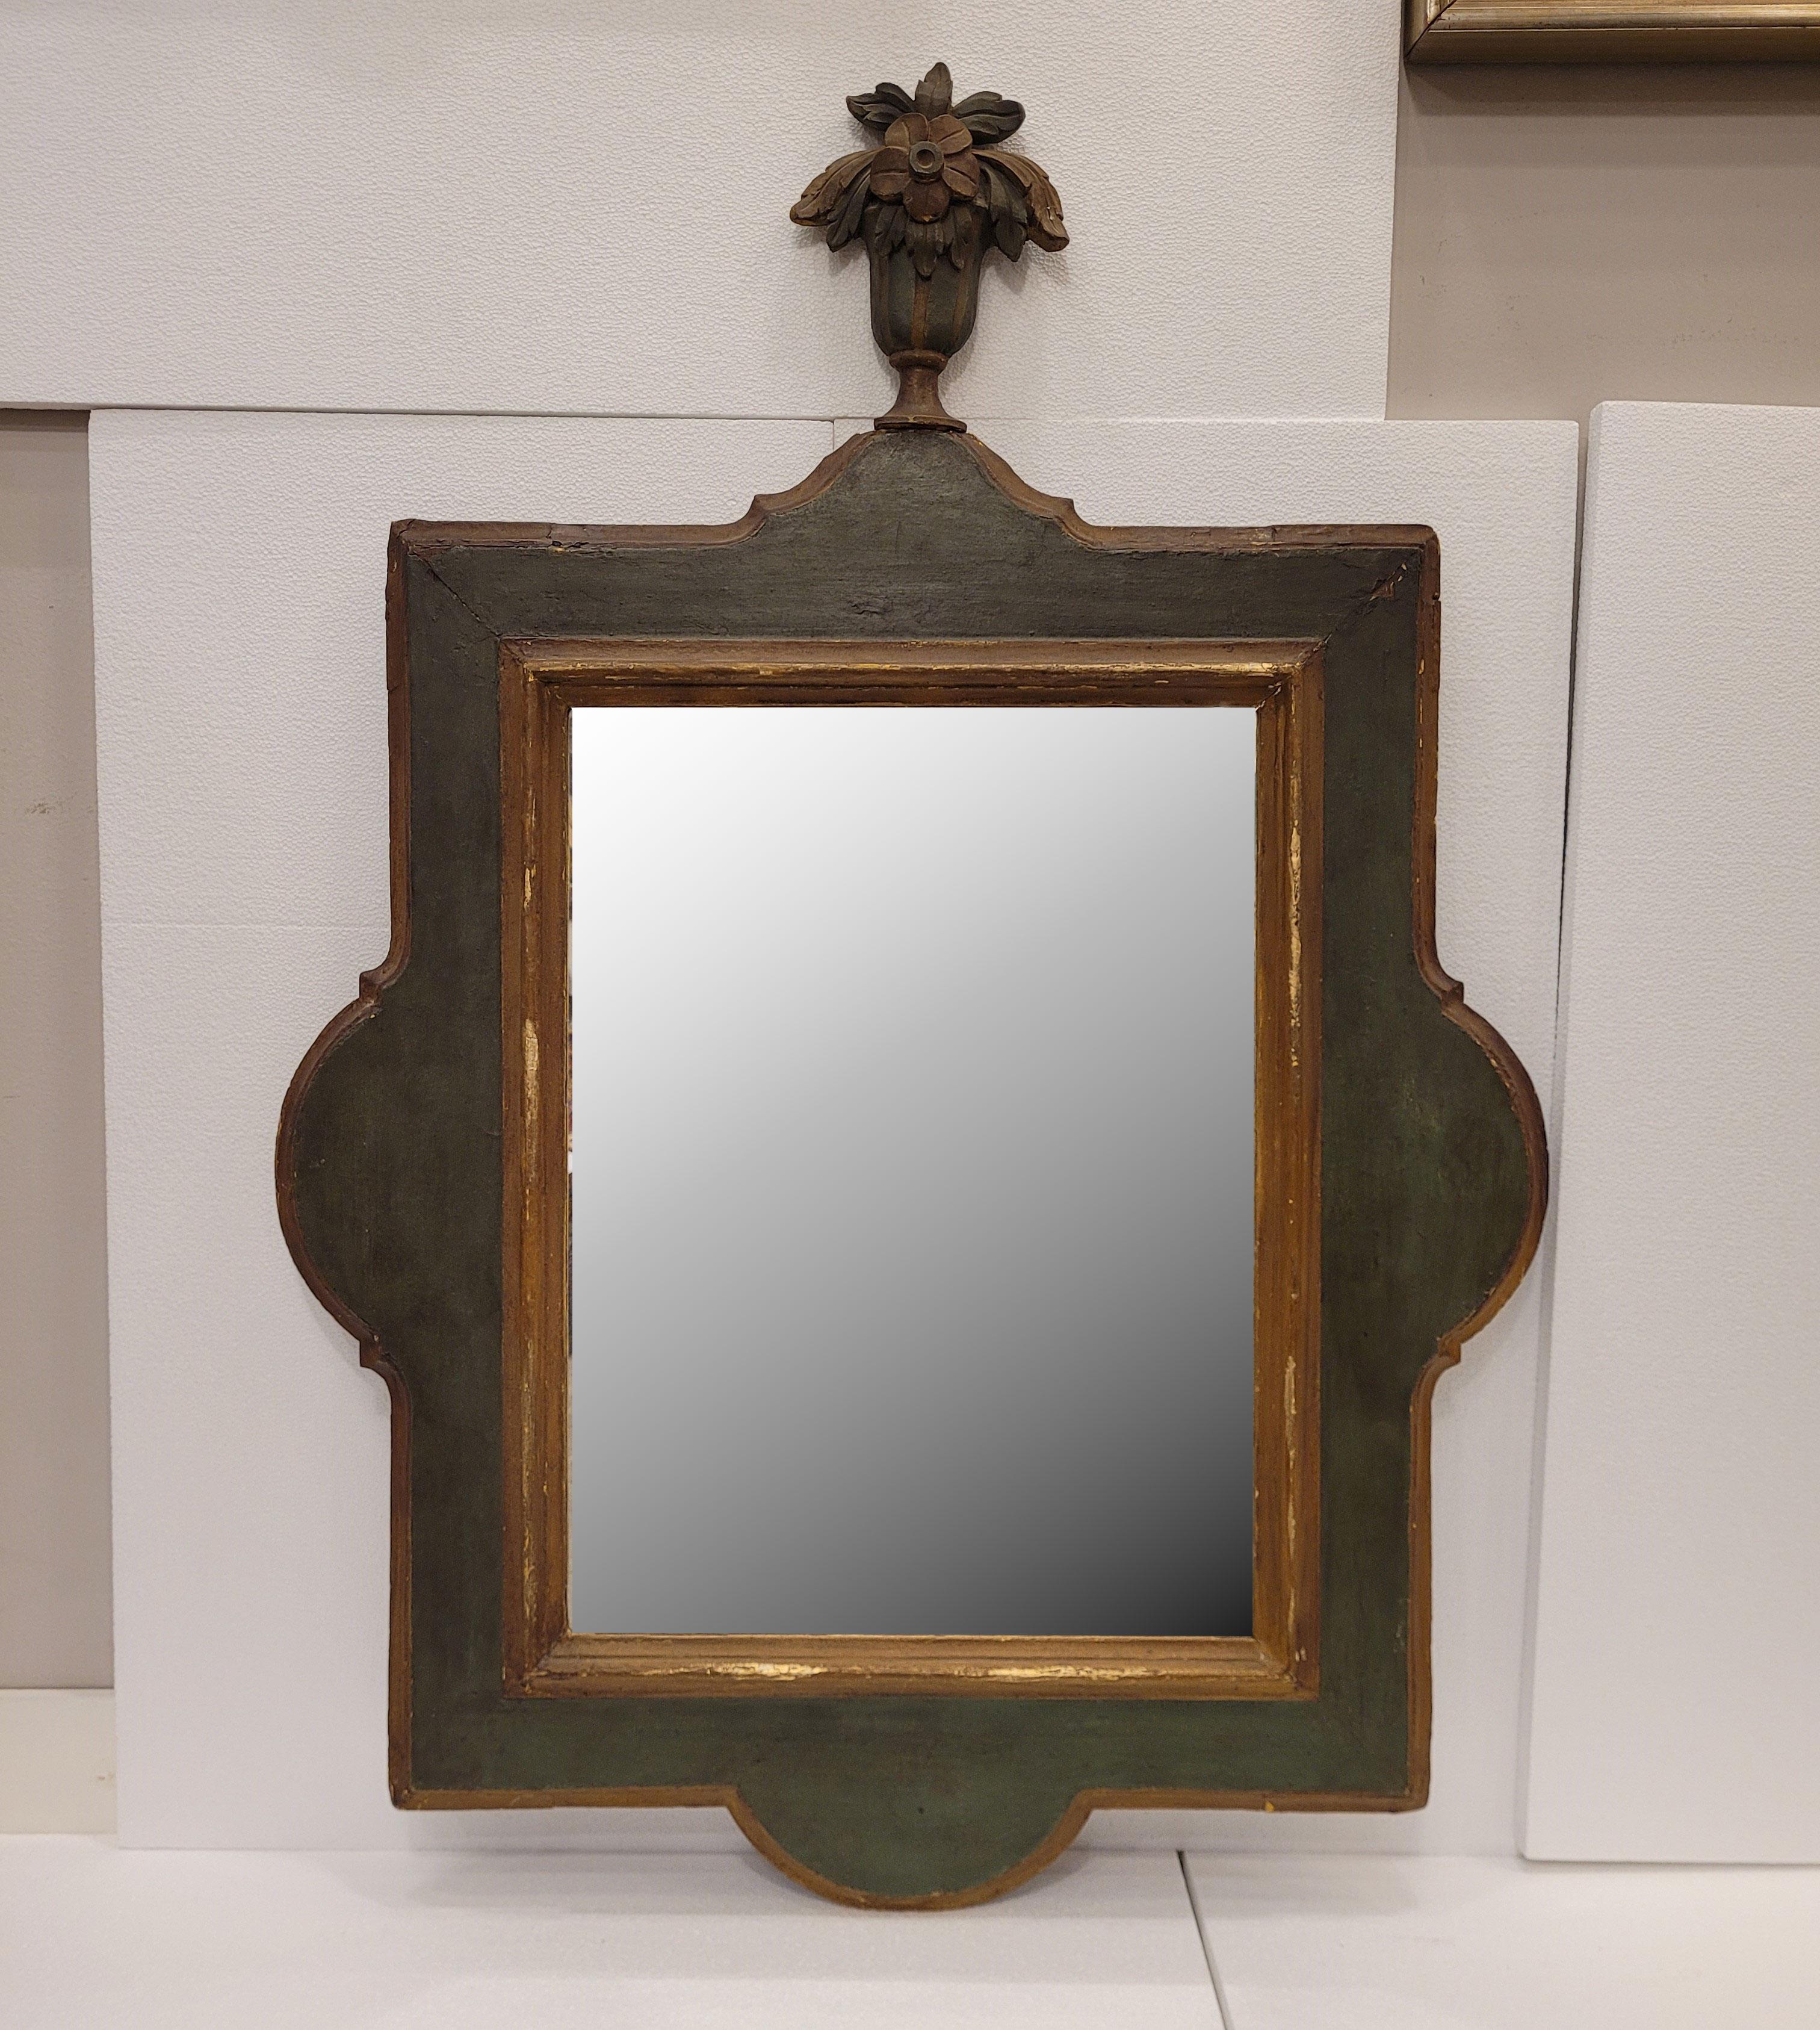 Spectacular French mirror in the Louis XV Provençal style, 18th century.
With a mixteline profile in polychrome wood in a soft French green and golden profiles, already swept by time.
With a cornucopia in carved and polychrome wood representing an